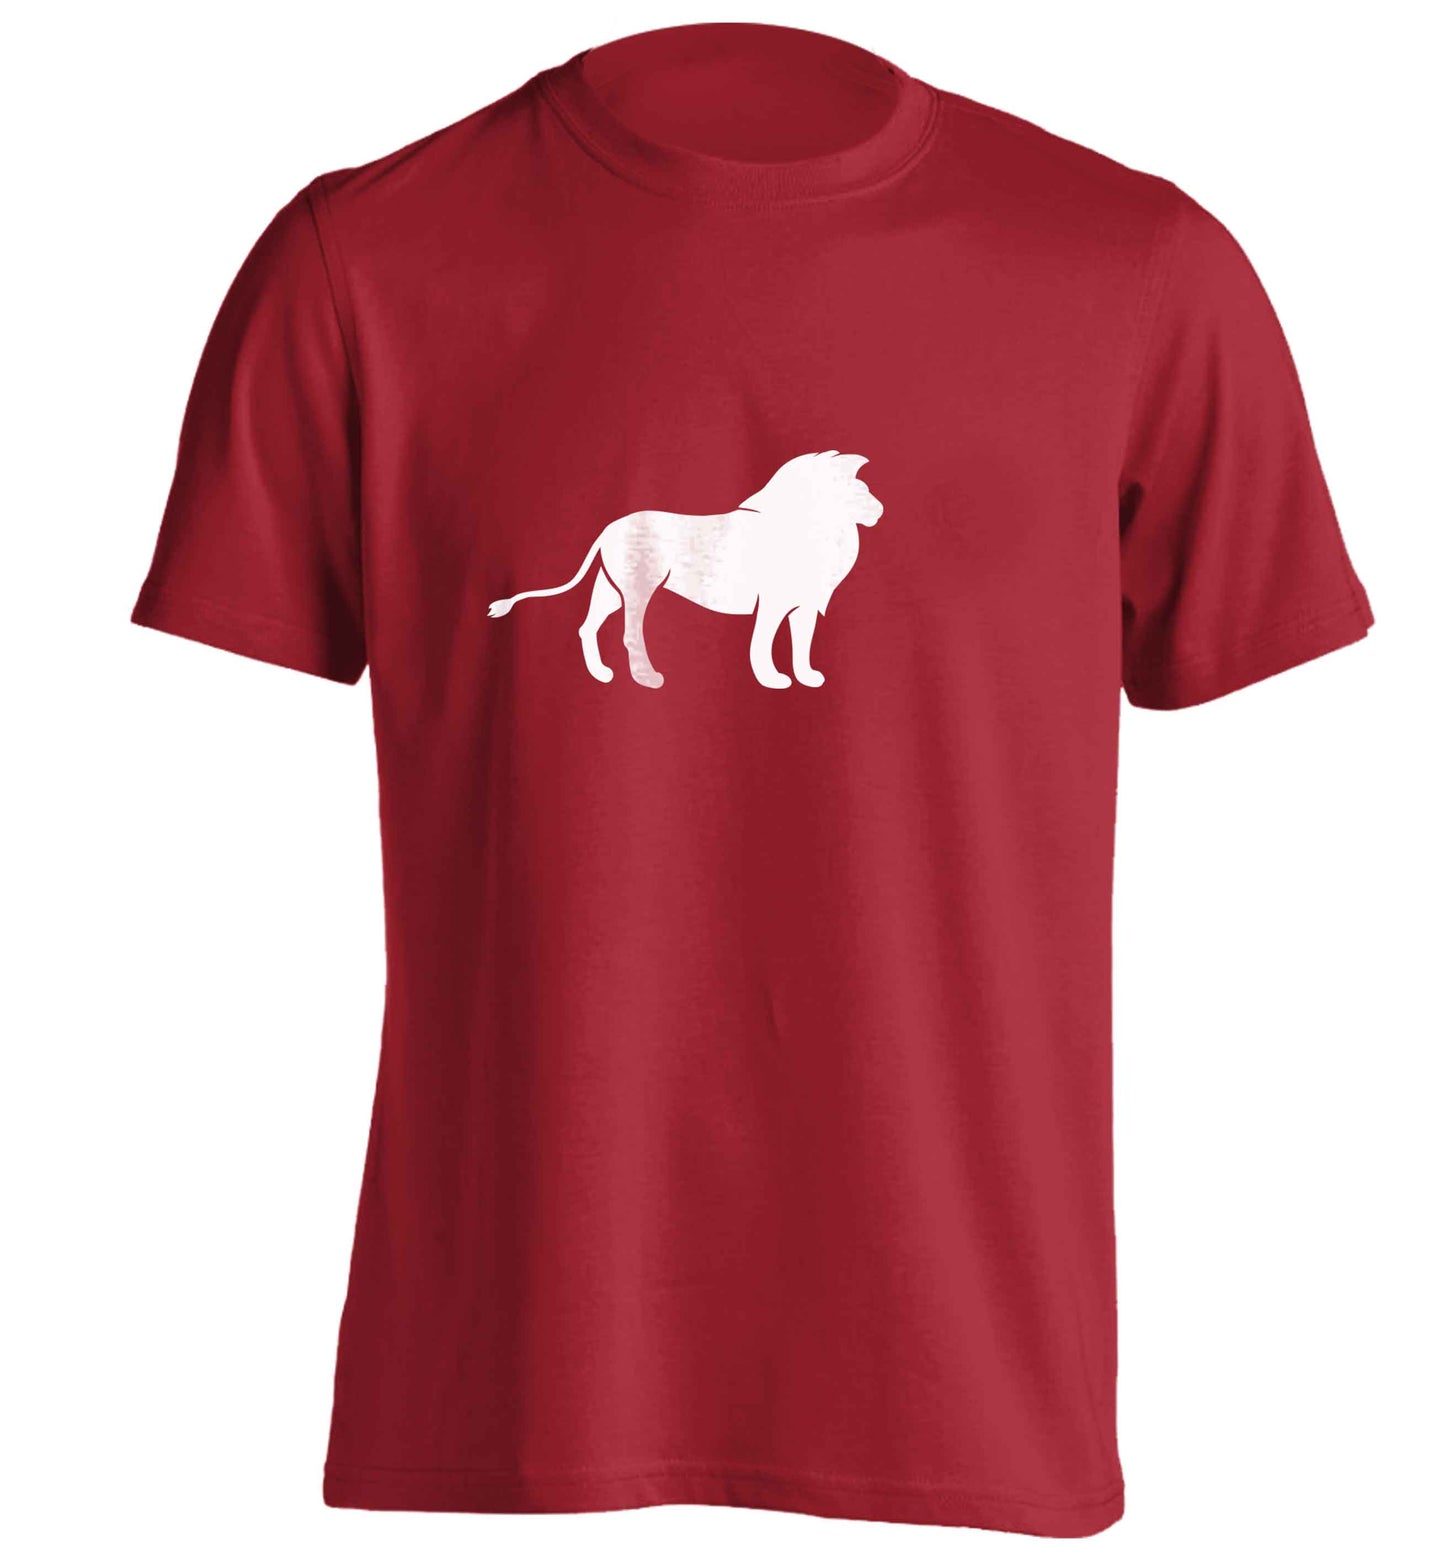 Gold lion adults unisex red Tshirt 2XL